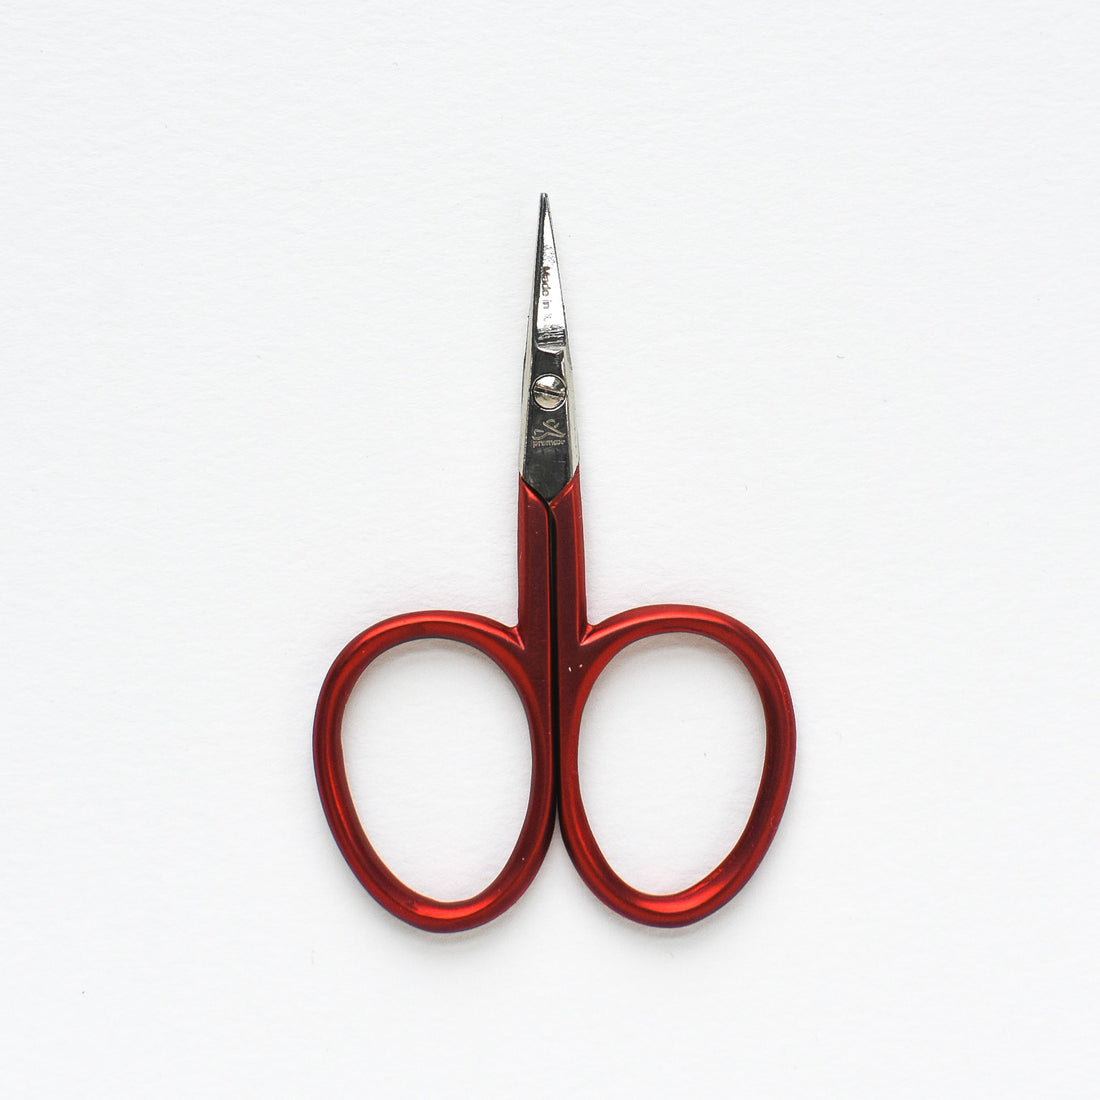 Tiny Red Embroidery Scissors